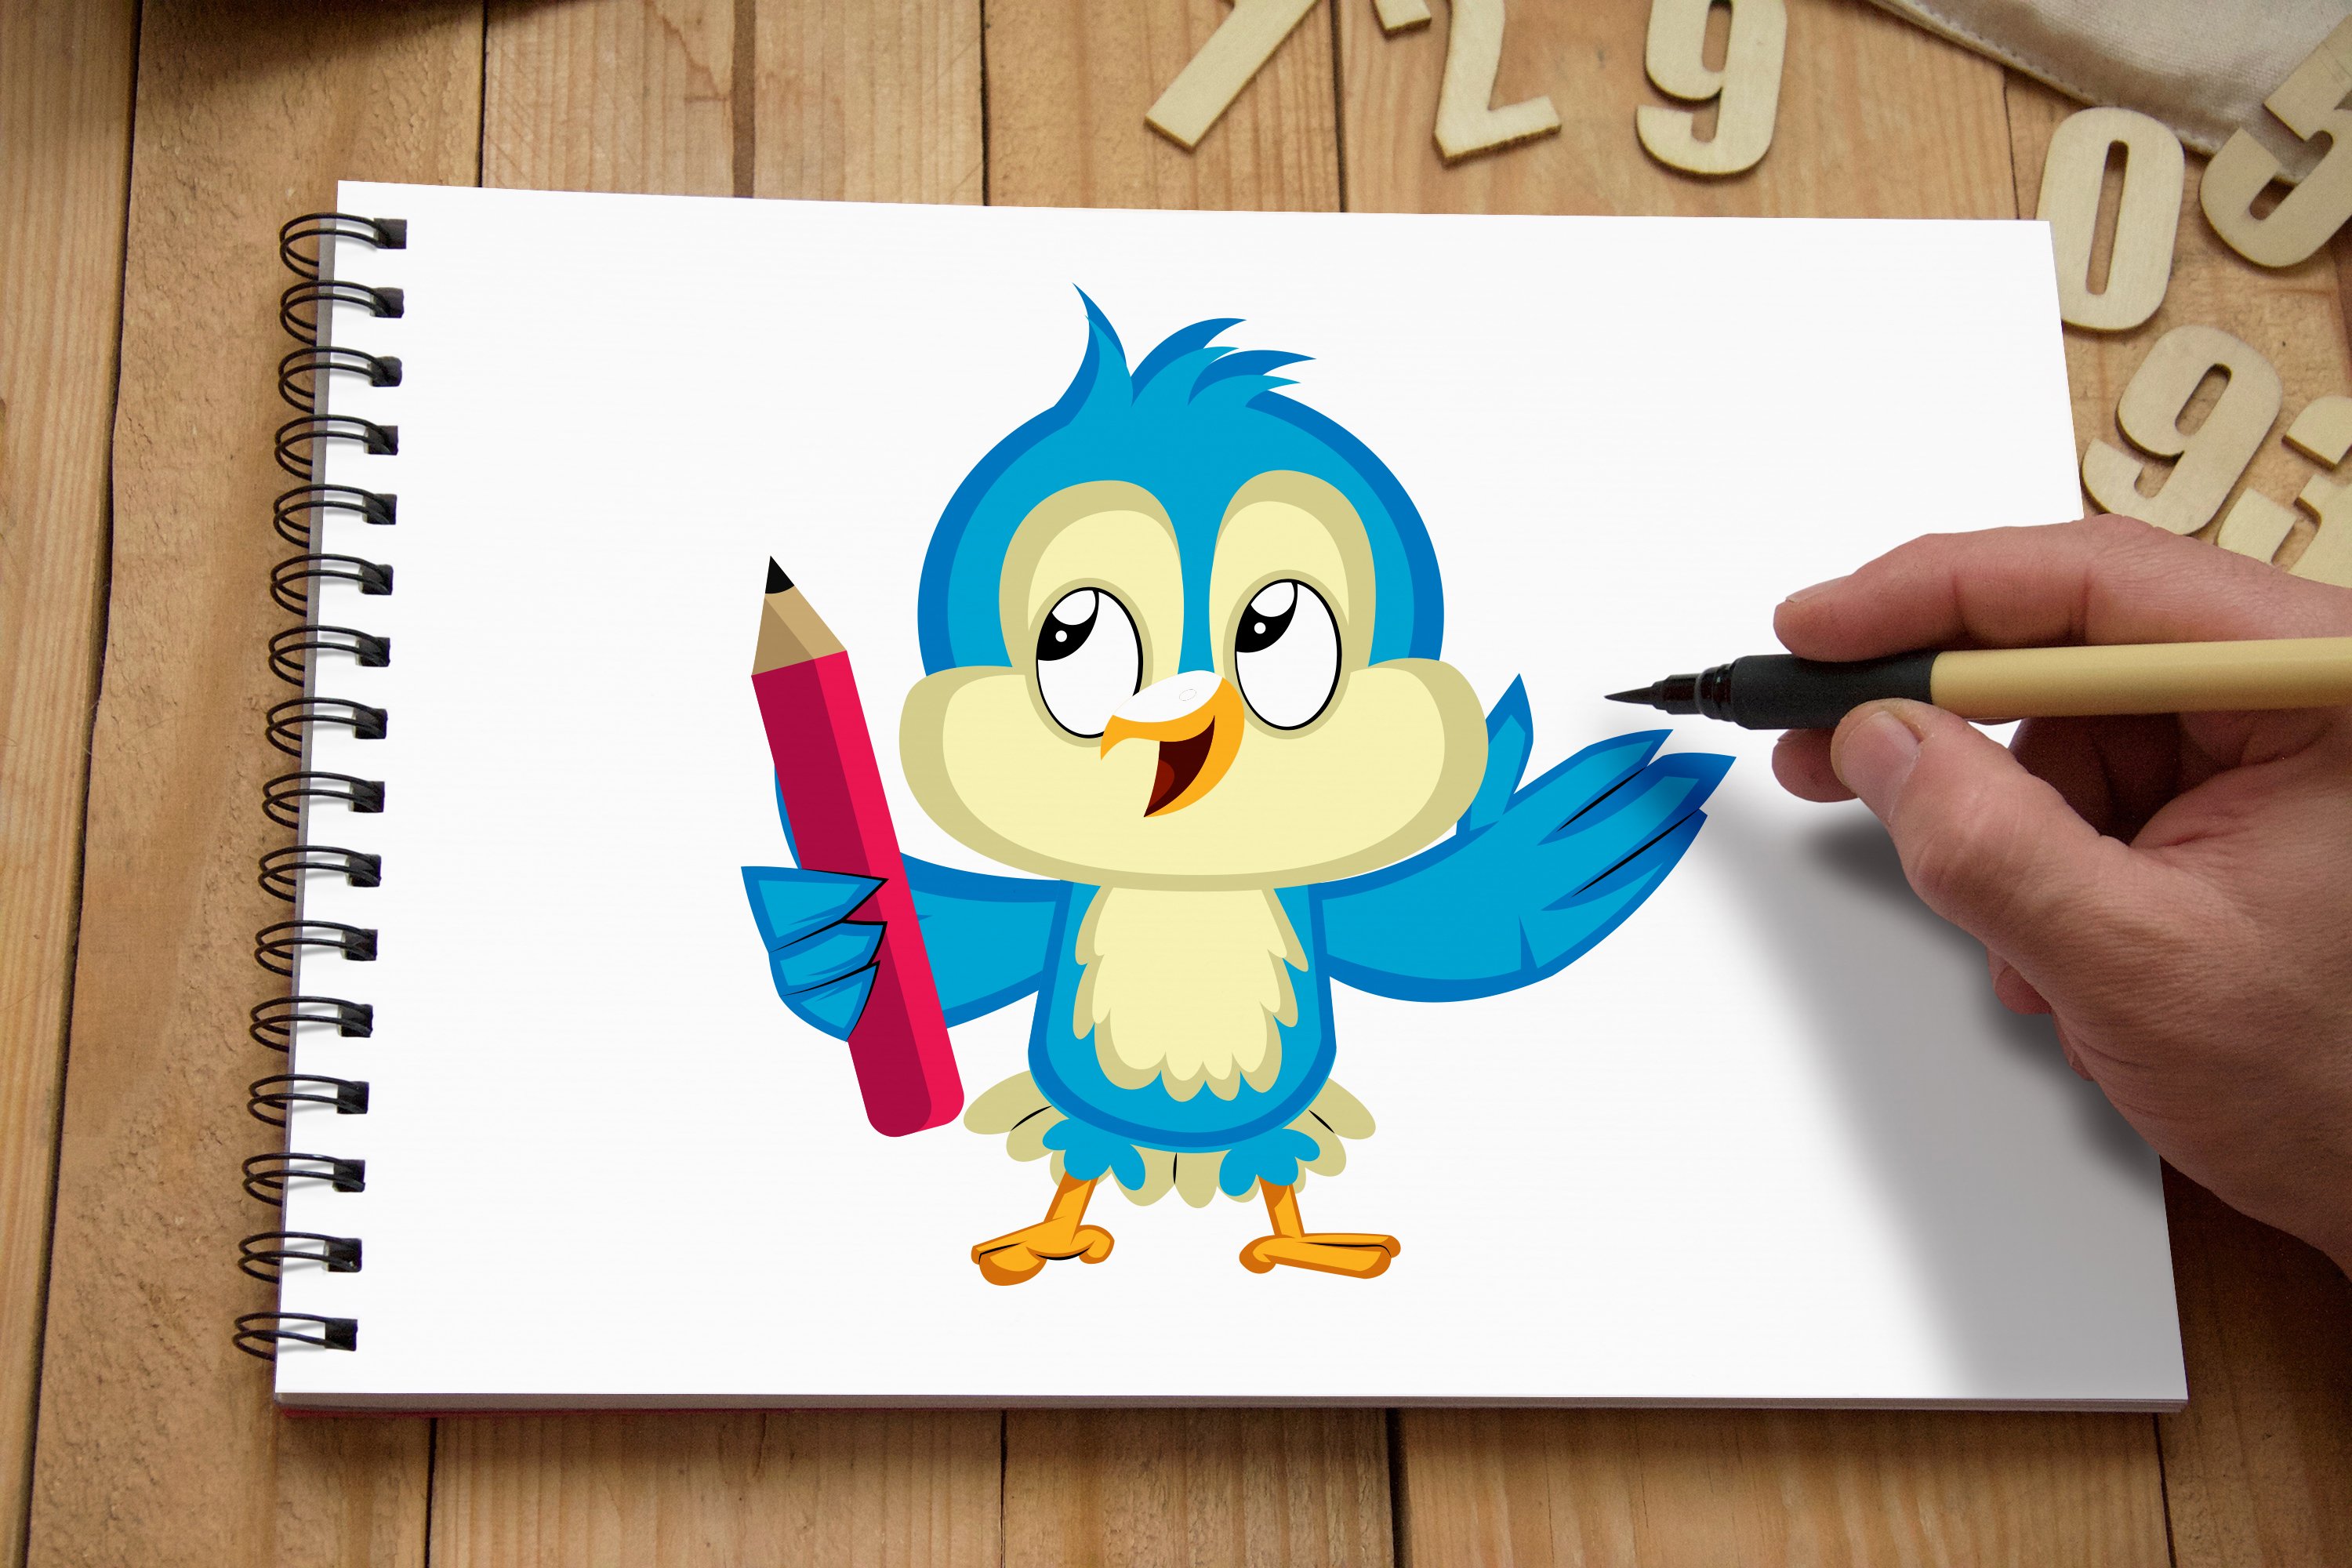 The drawing of a bird on a piece of paper is large.